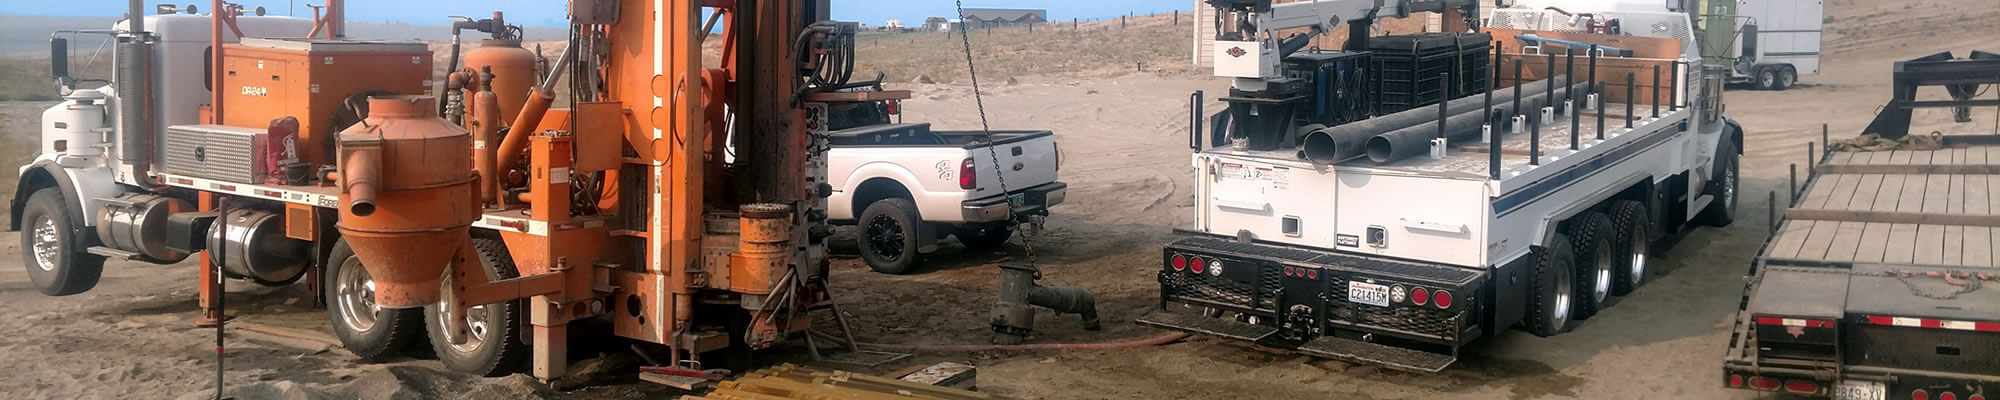 Drilling a home water well - Cle Elum, WA